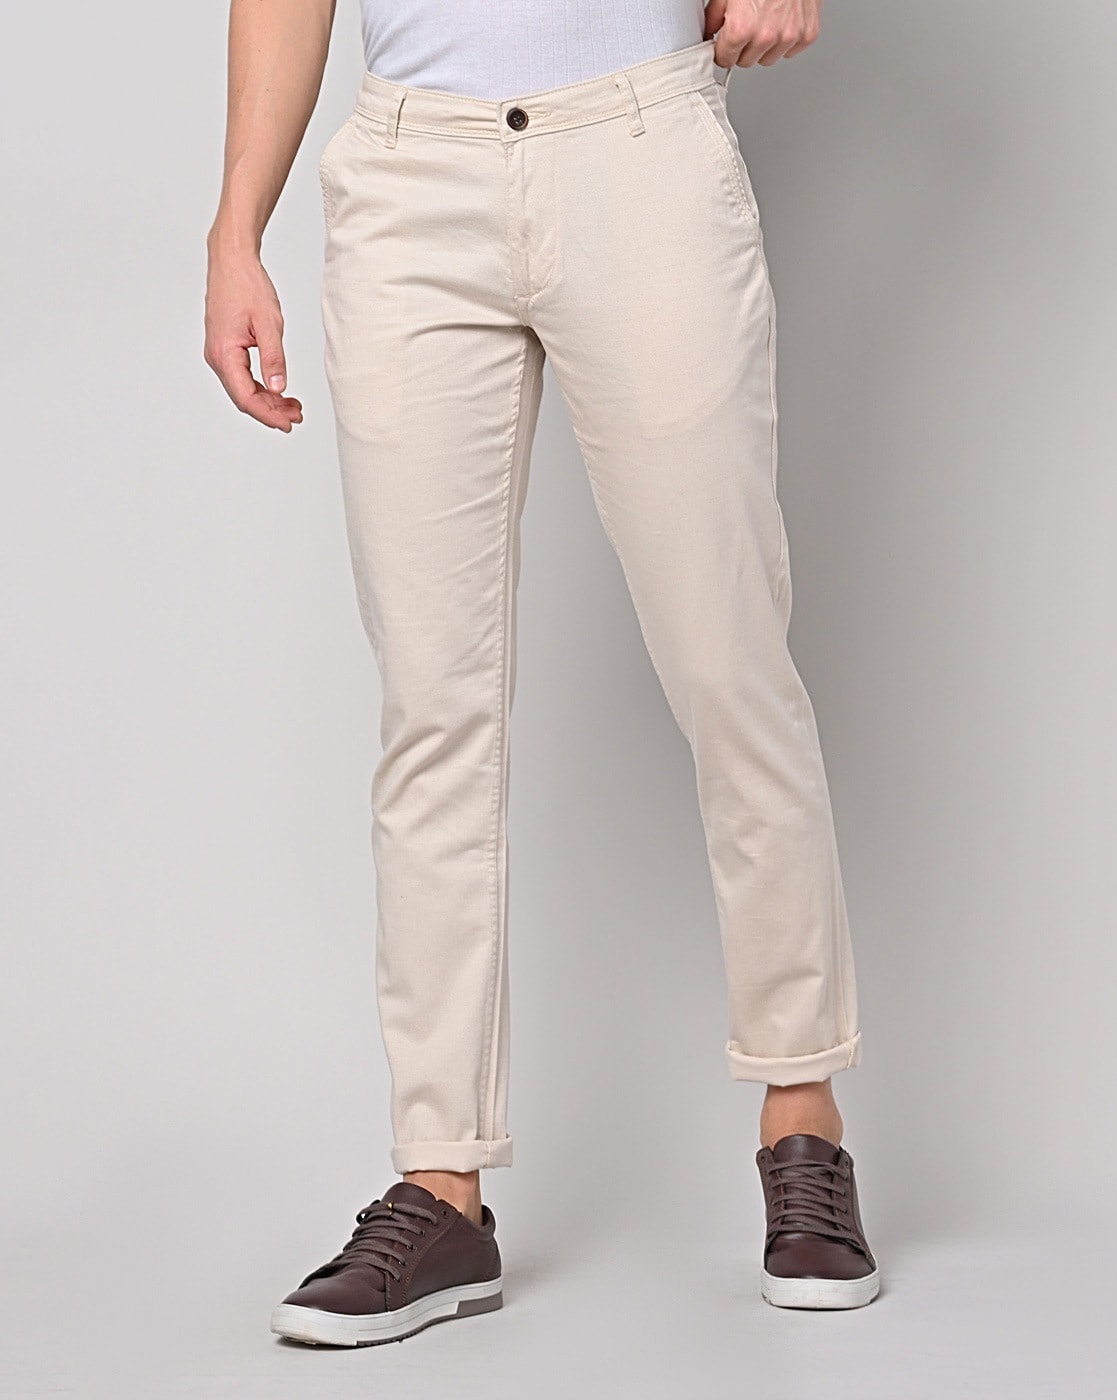 Buy AD by Arvind Men Black Regular Fit Solid Casual Chinos - NNNOW.com